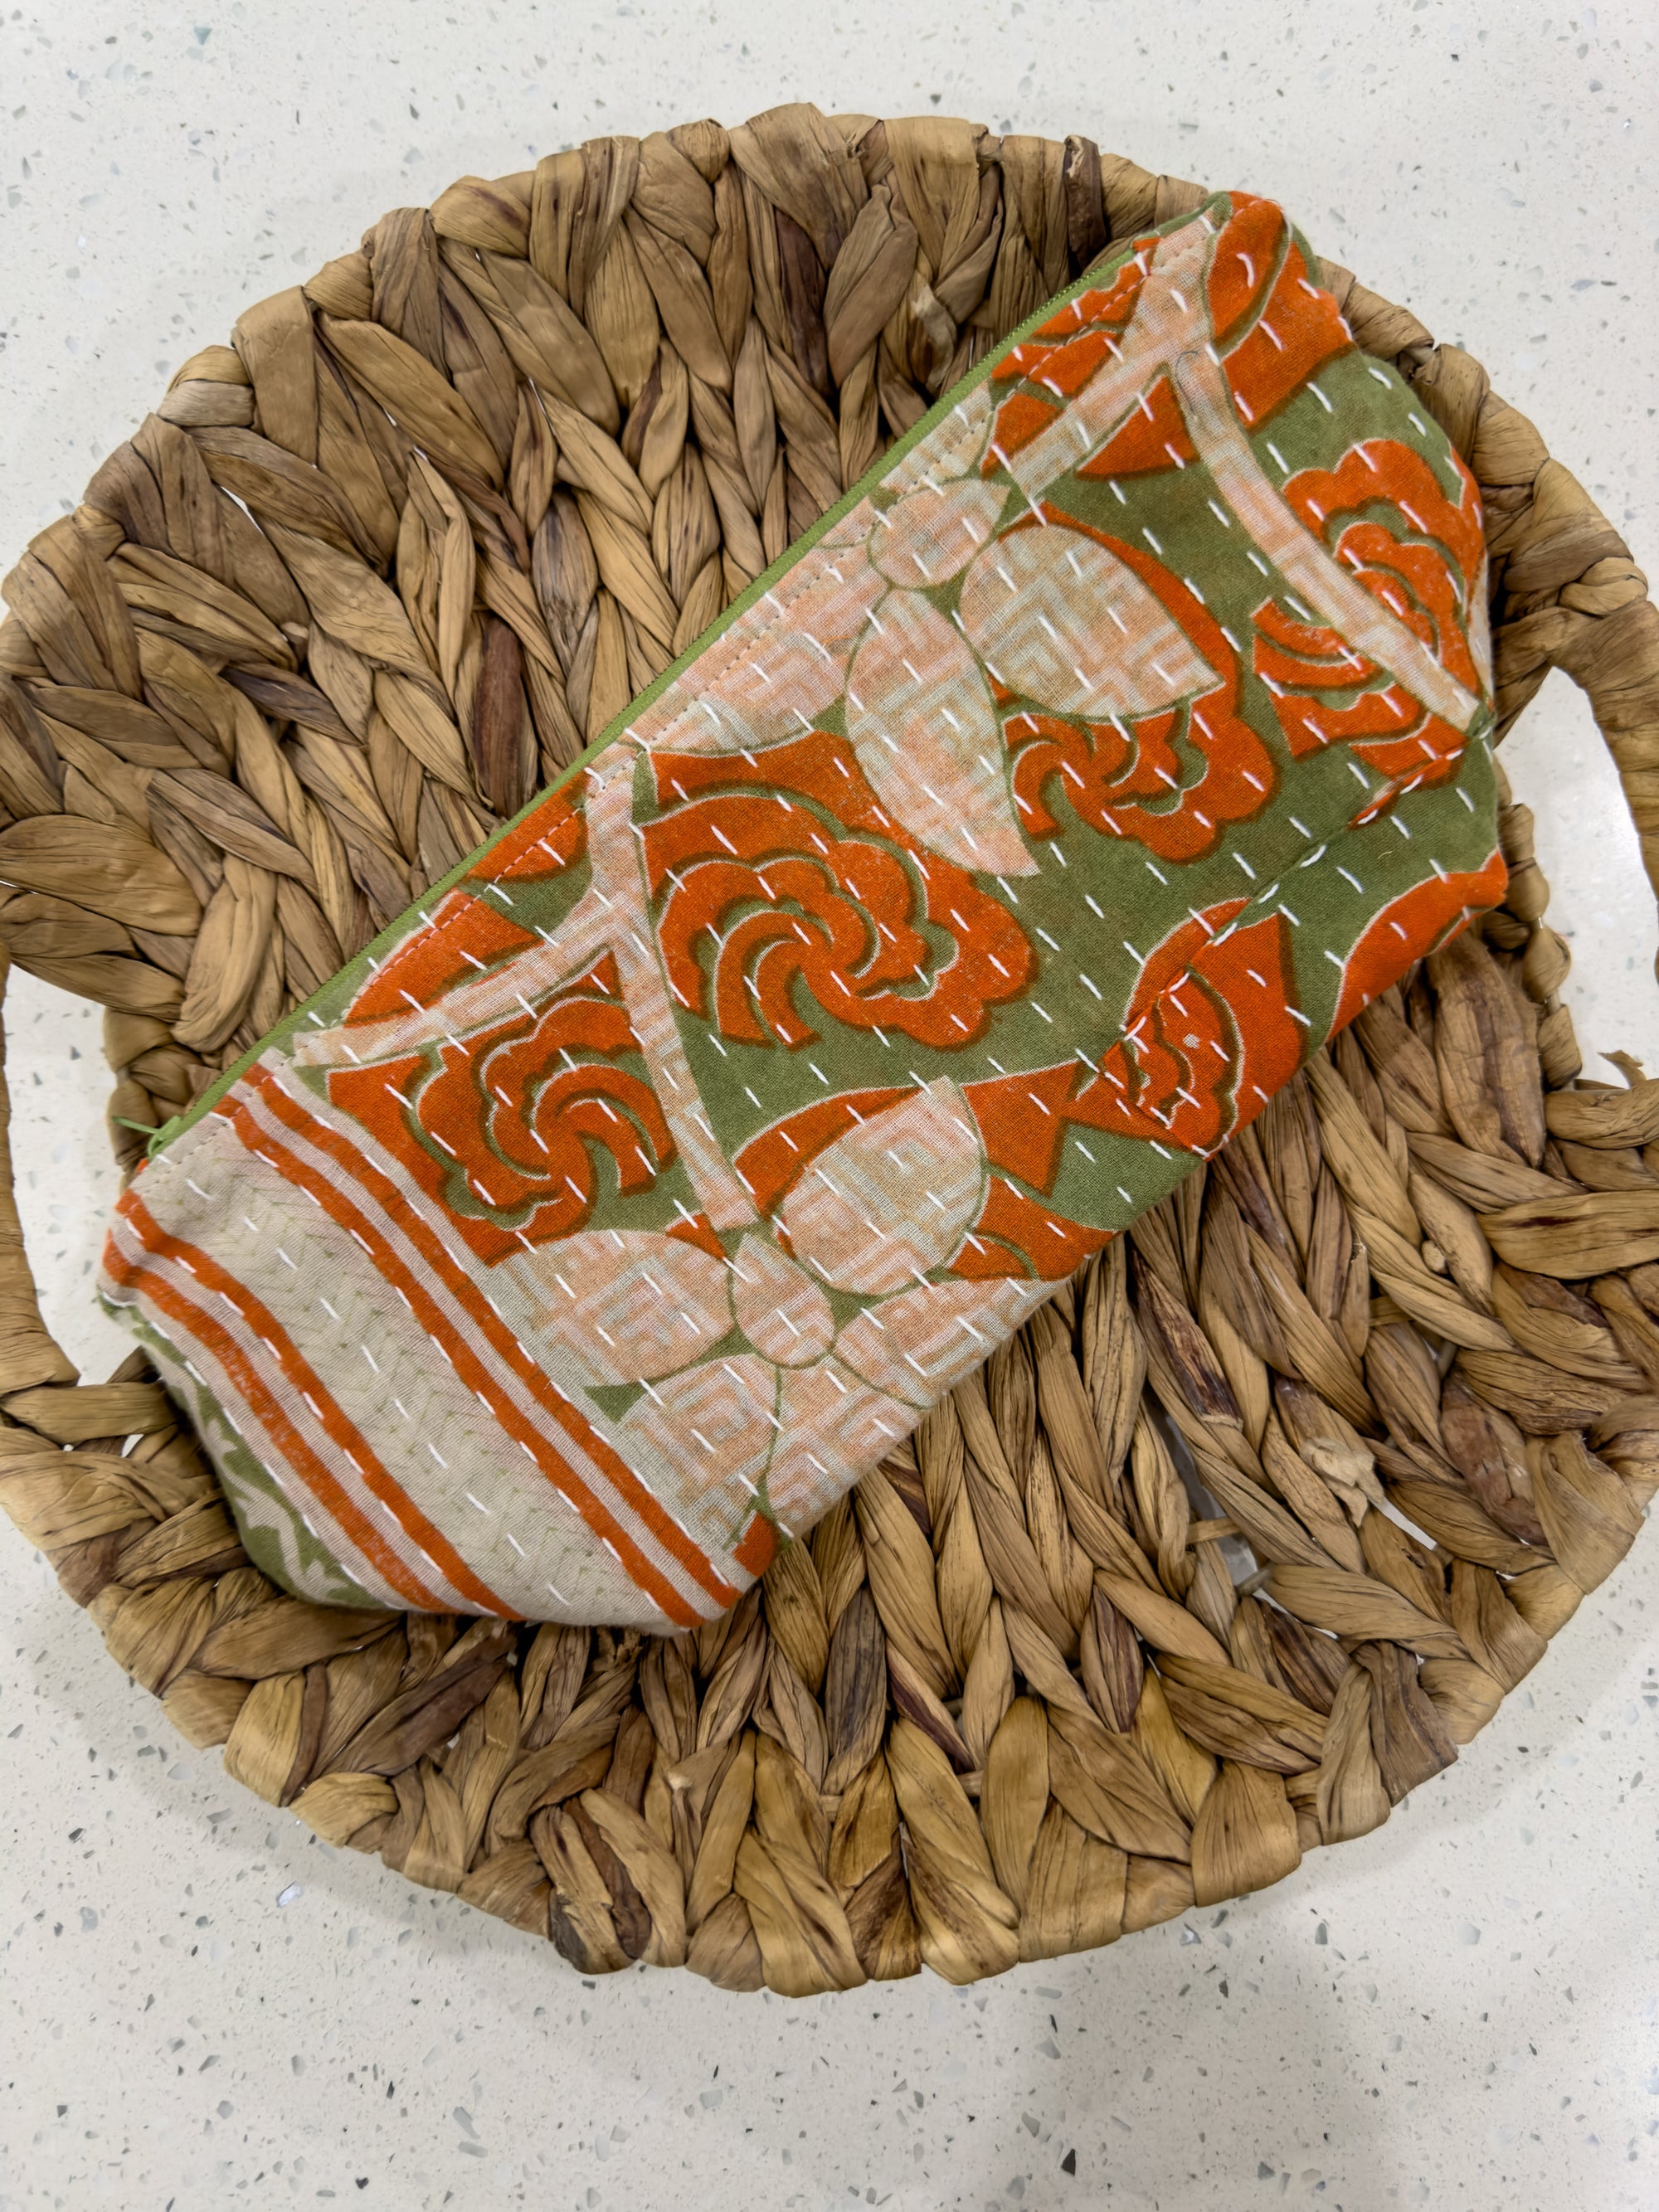 a woven basket with an orange and green design on it